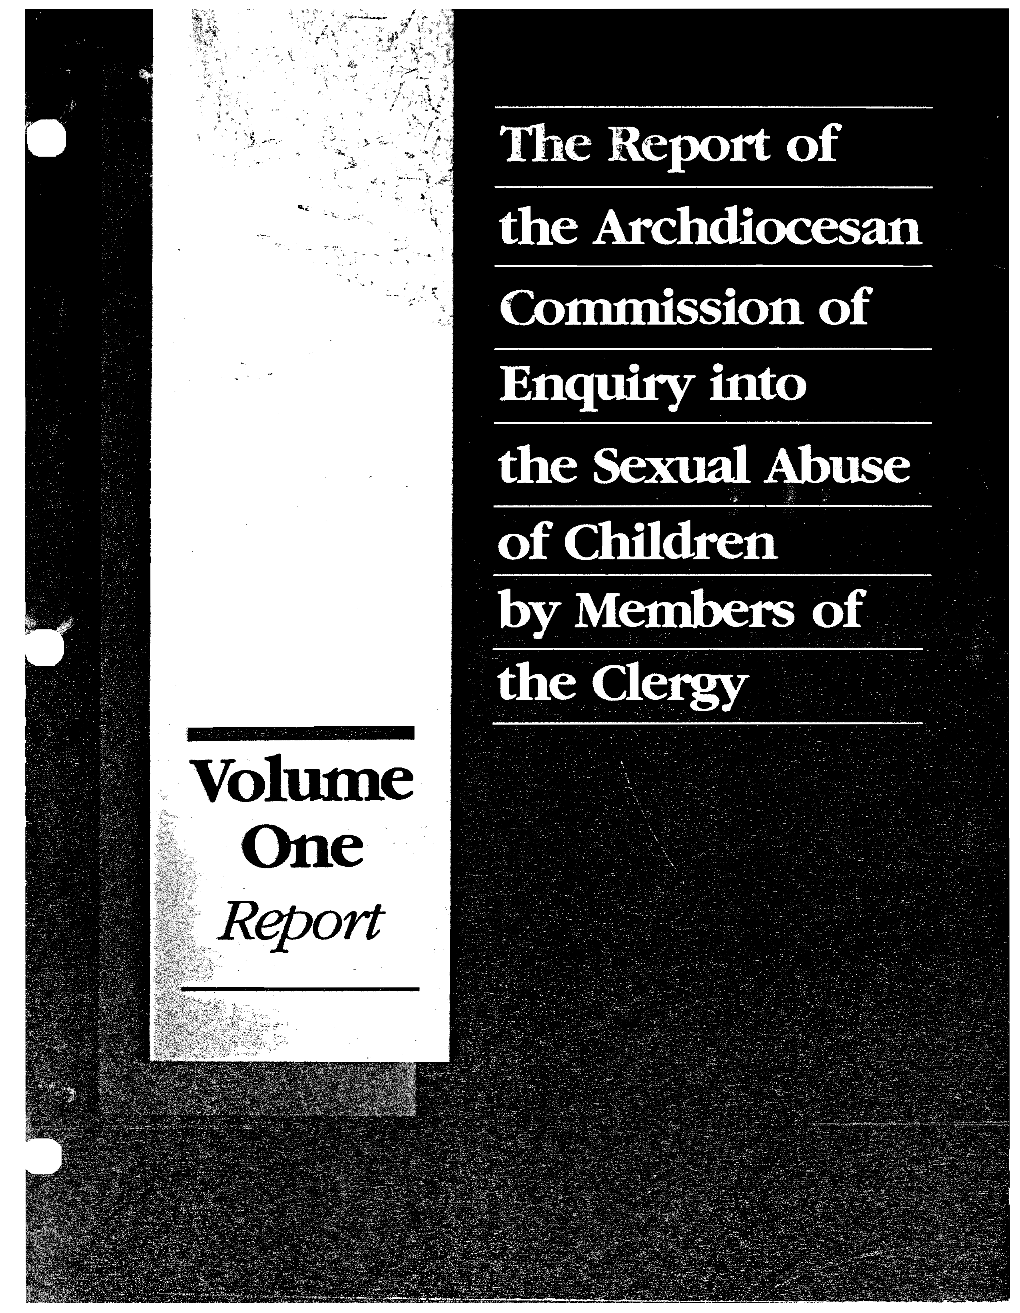 Volume One Report the Report Of